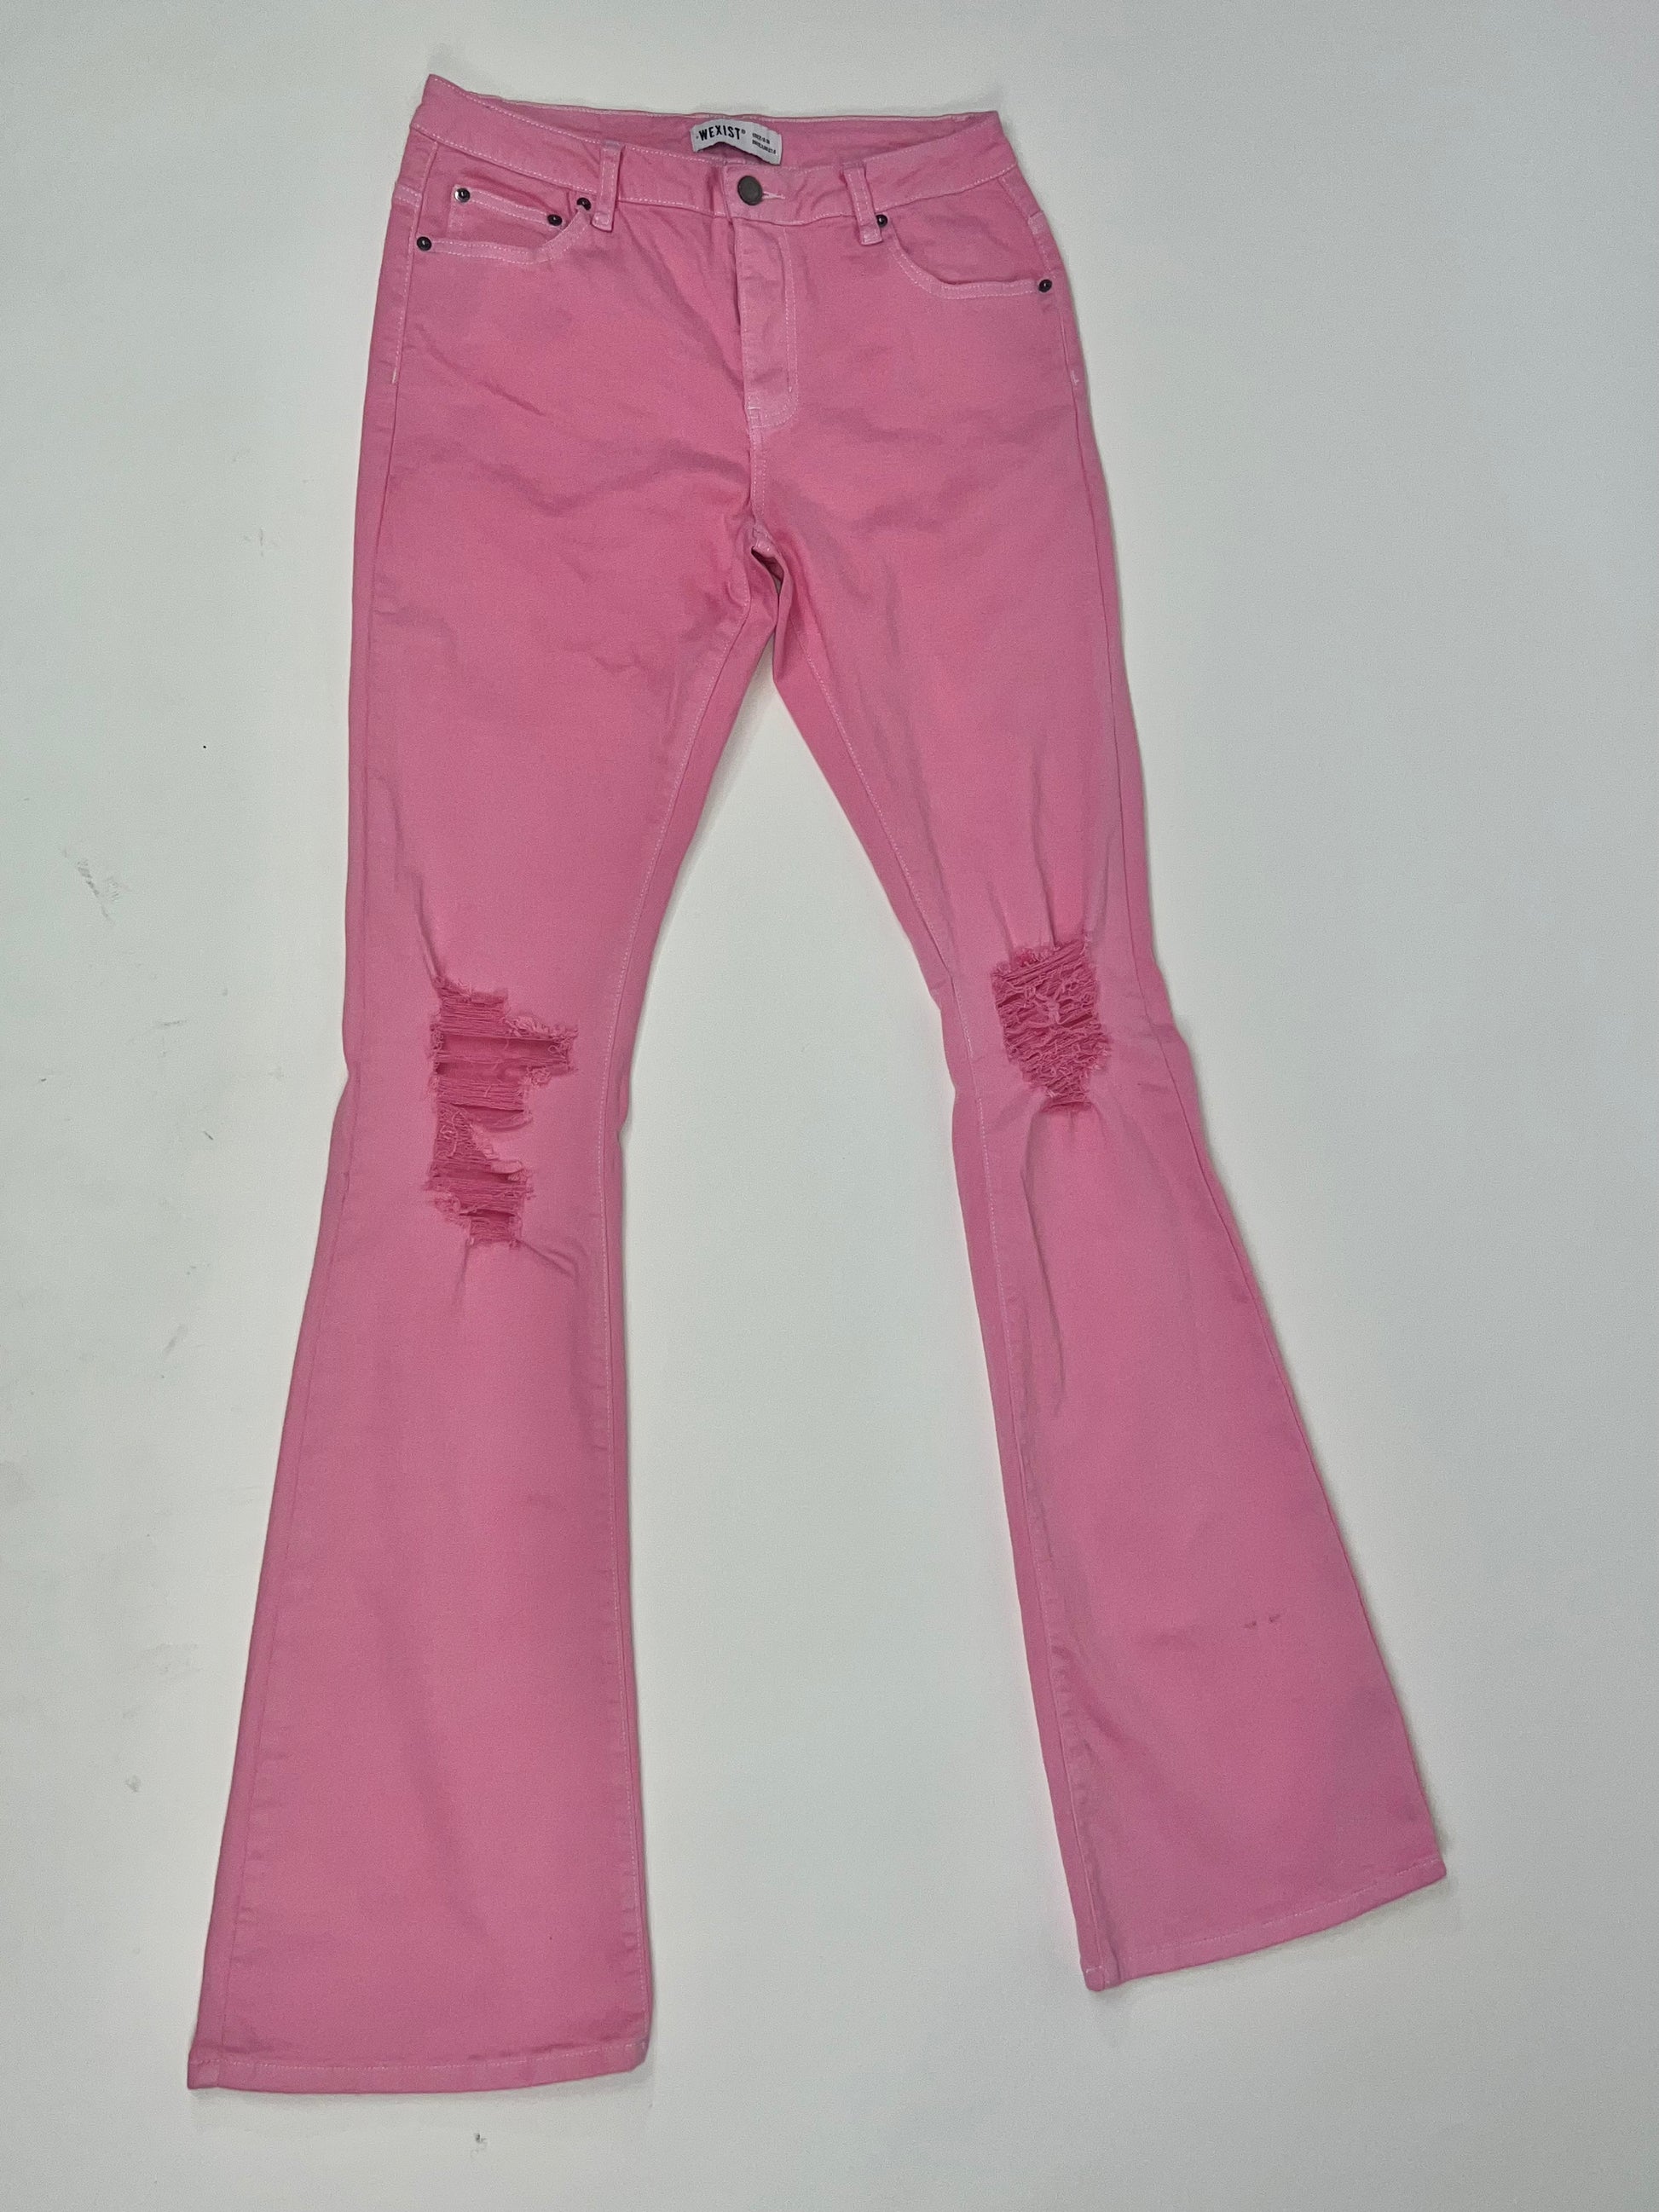 tall jeans for women in pink